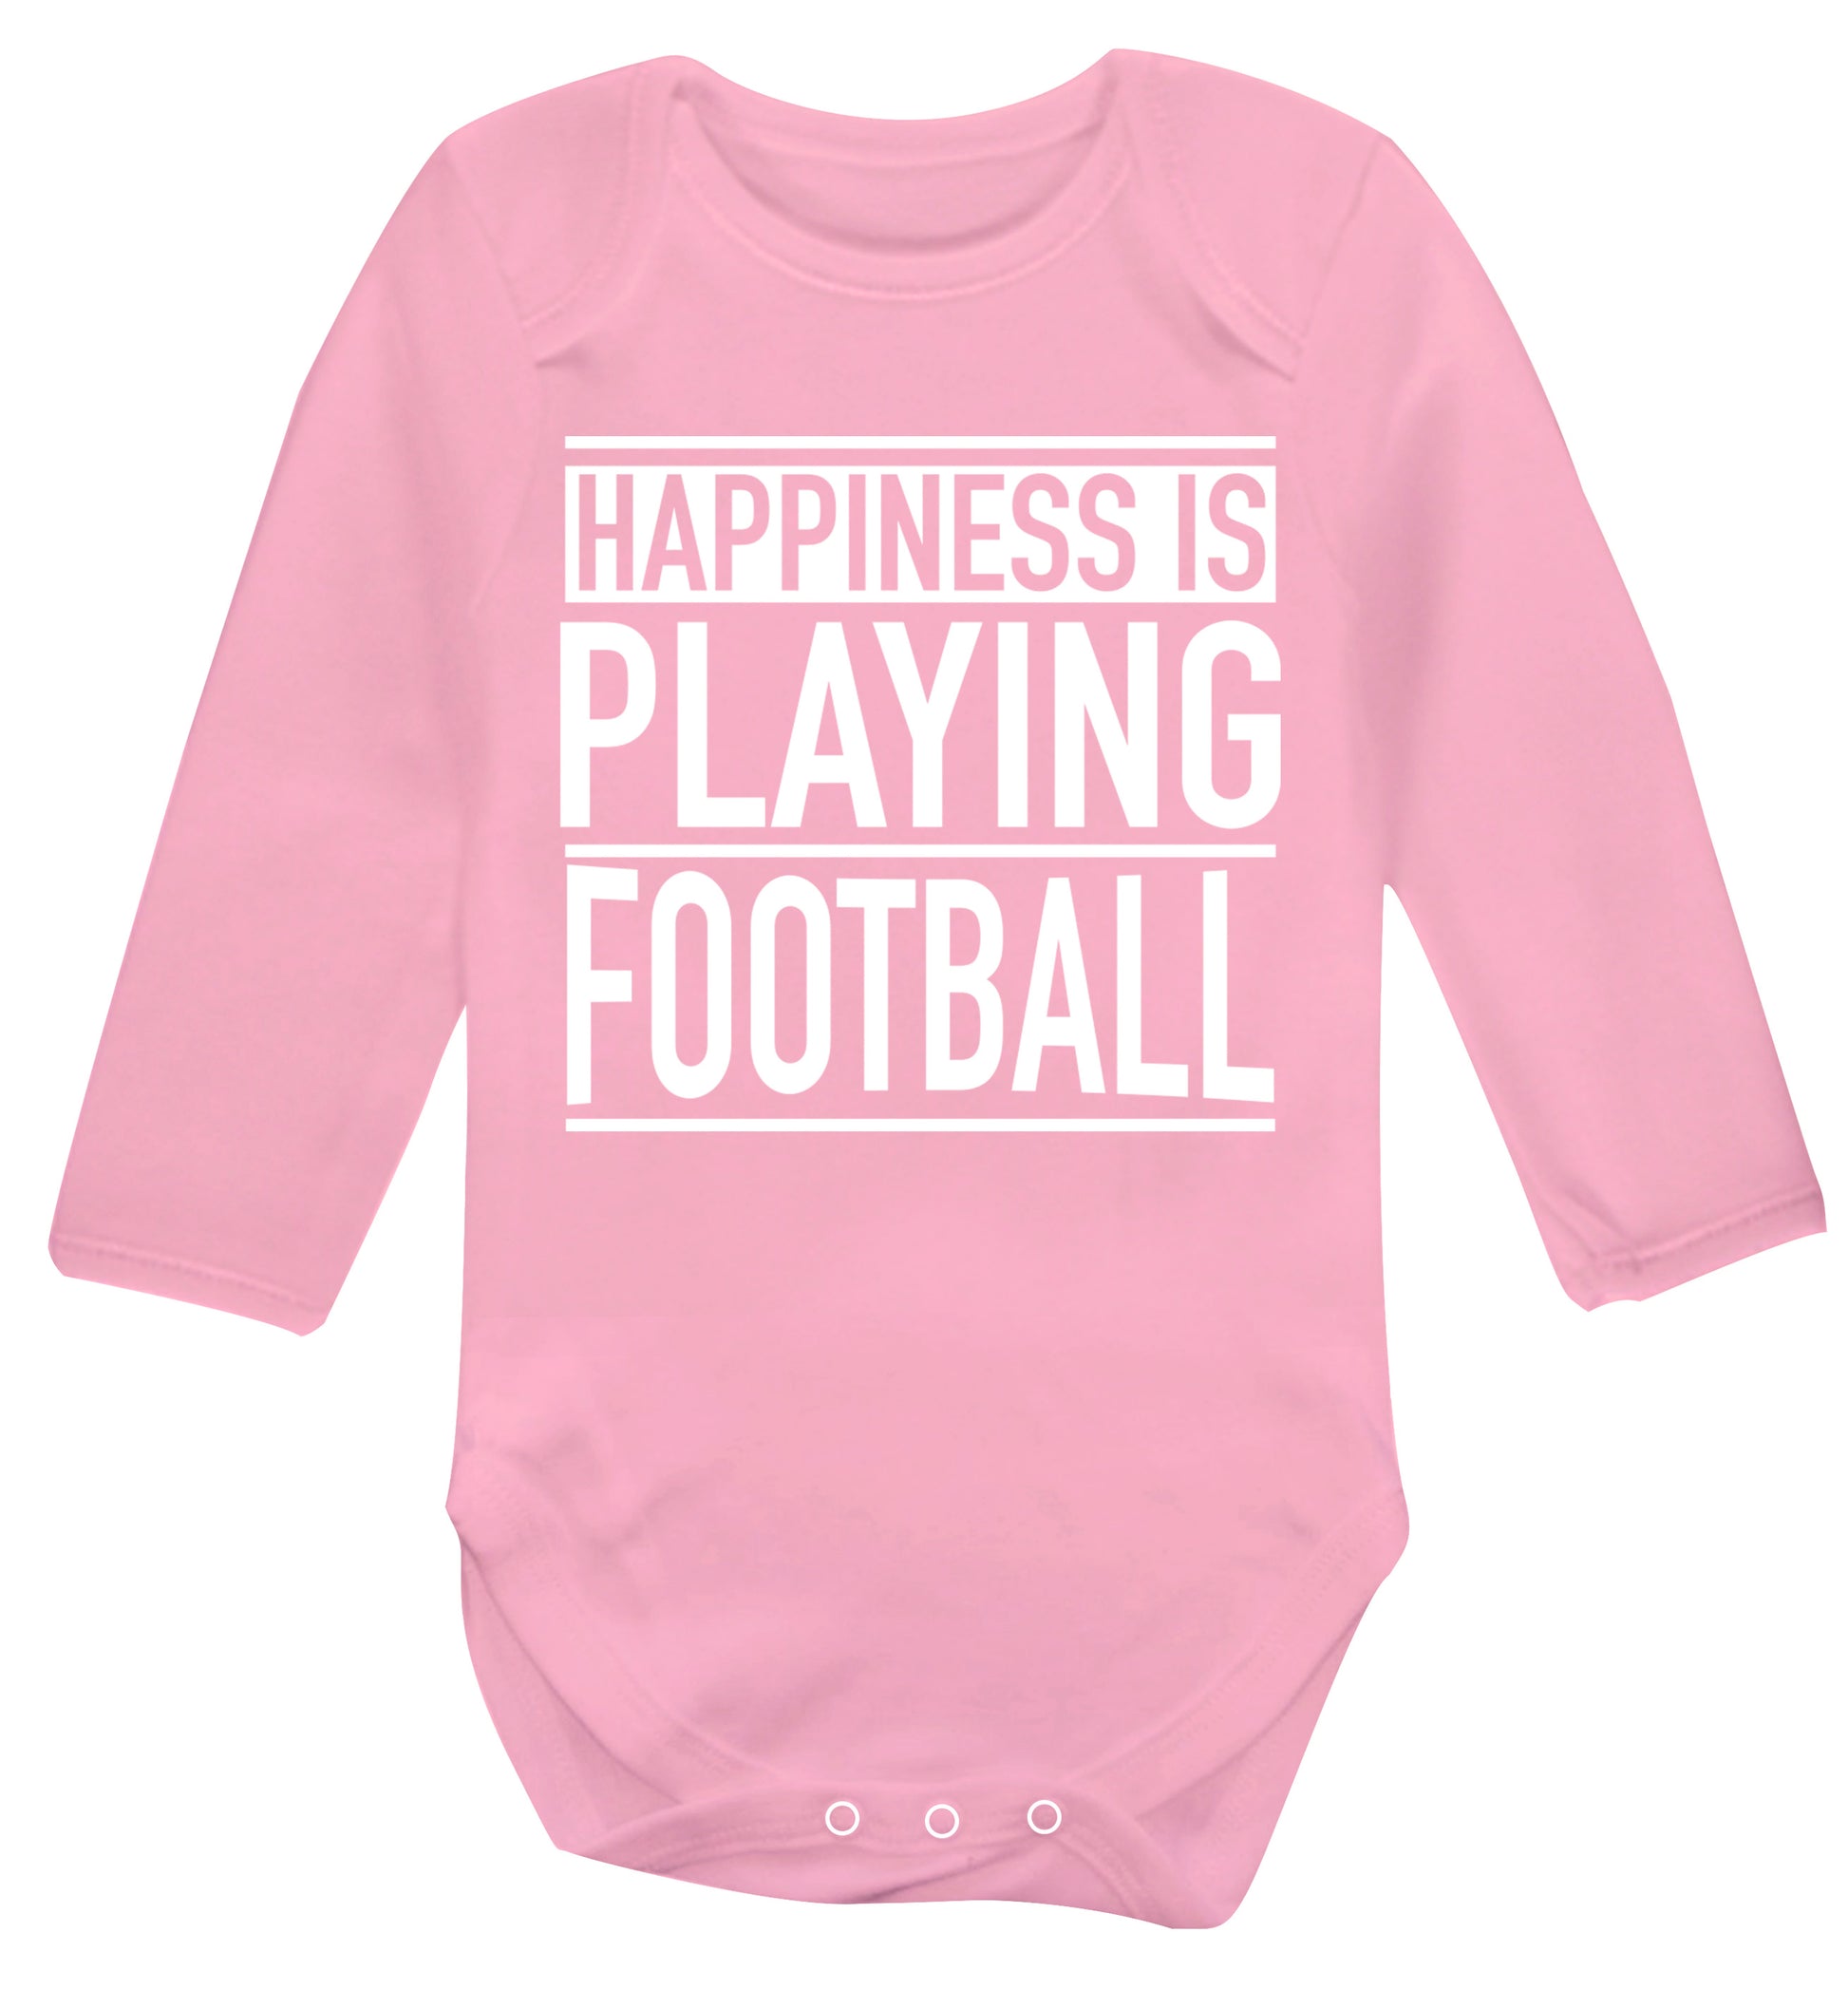 Happiness is playing football Baby Vest long sleeved pale pink 6-12 months